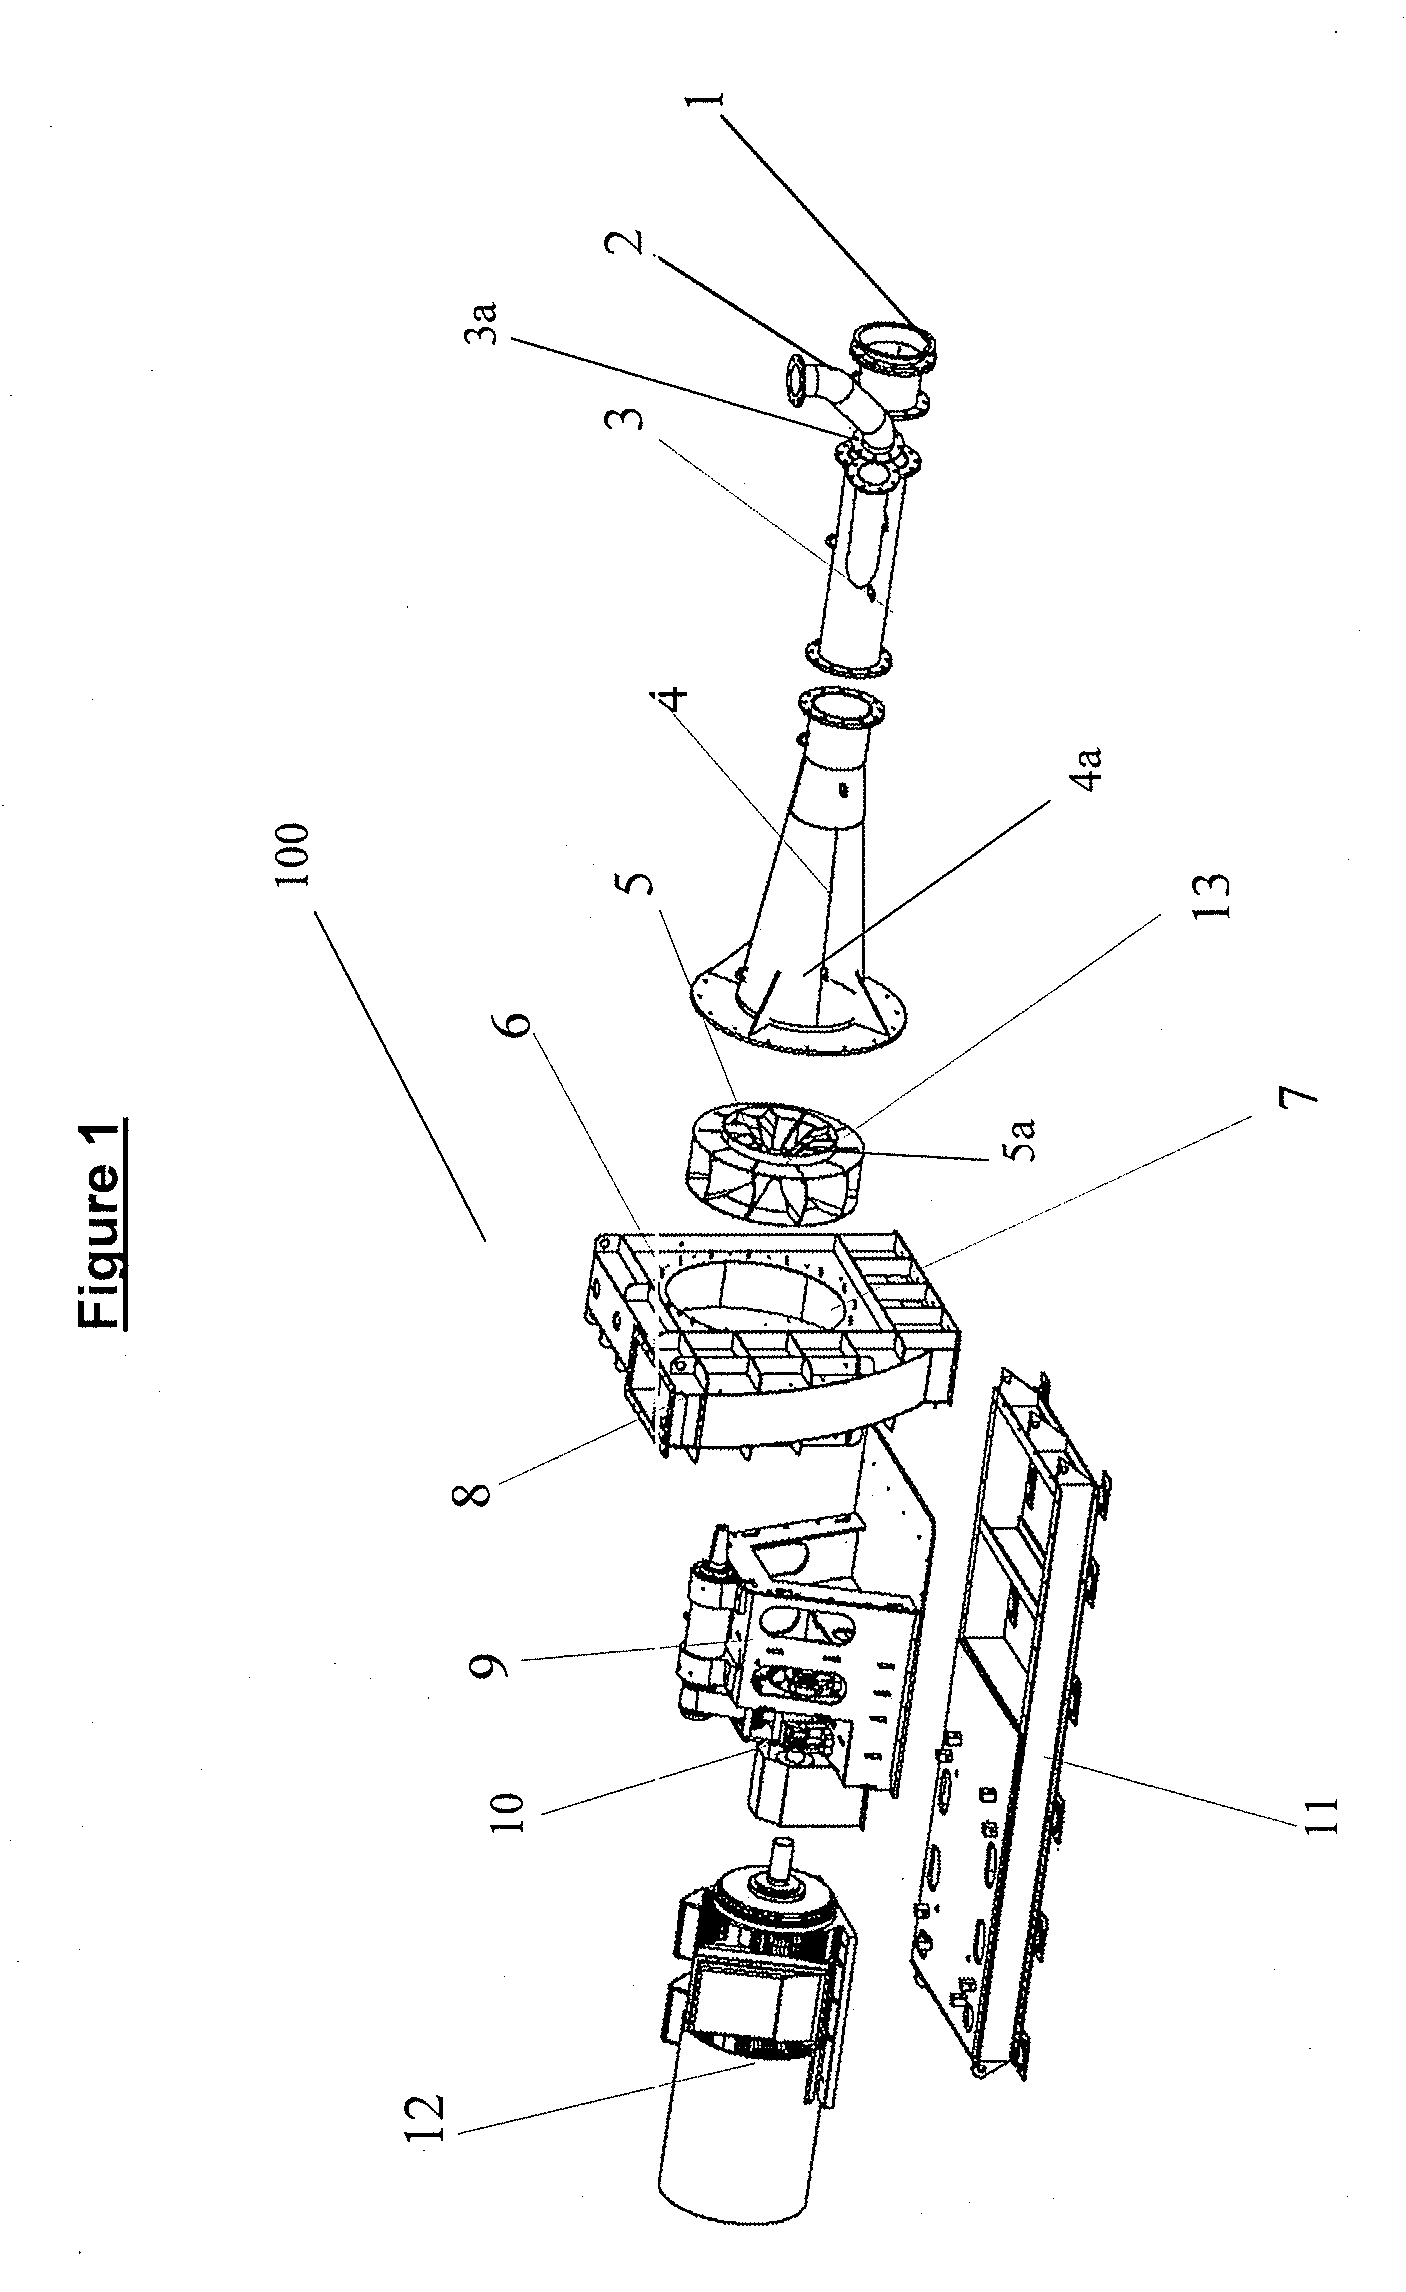 Apparatus and method for size reduction